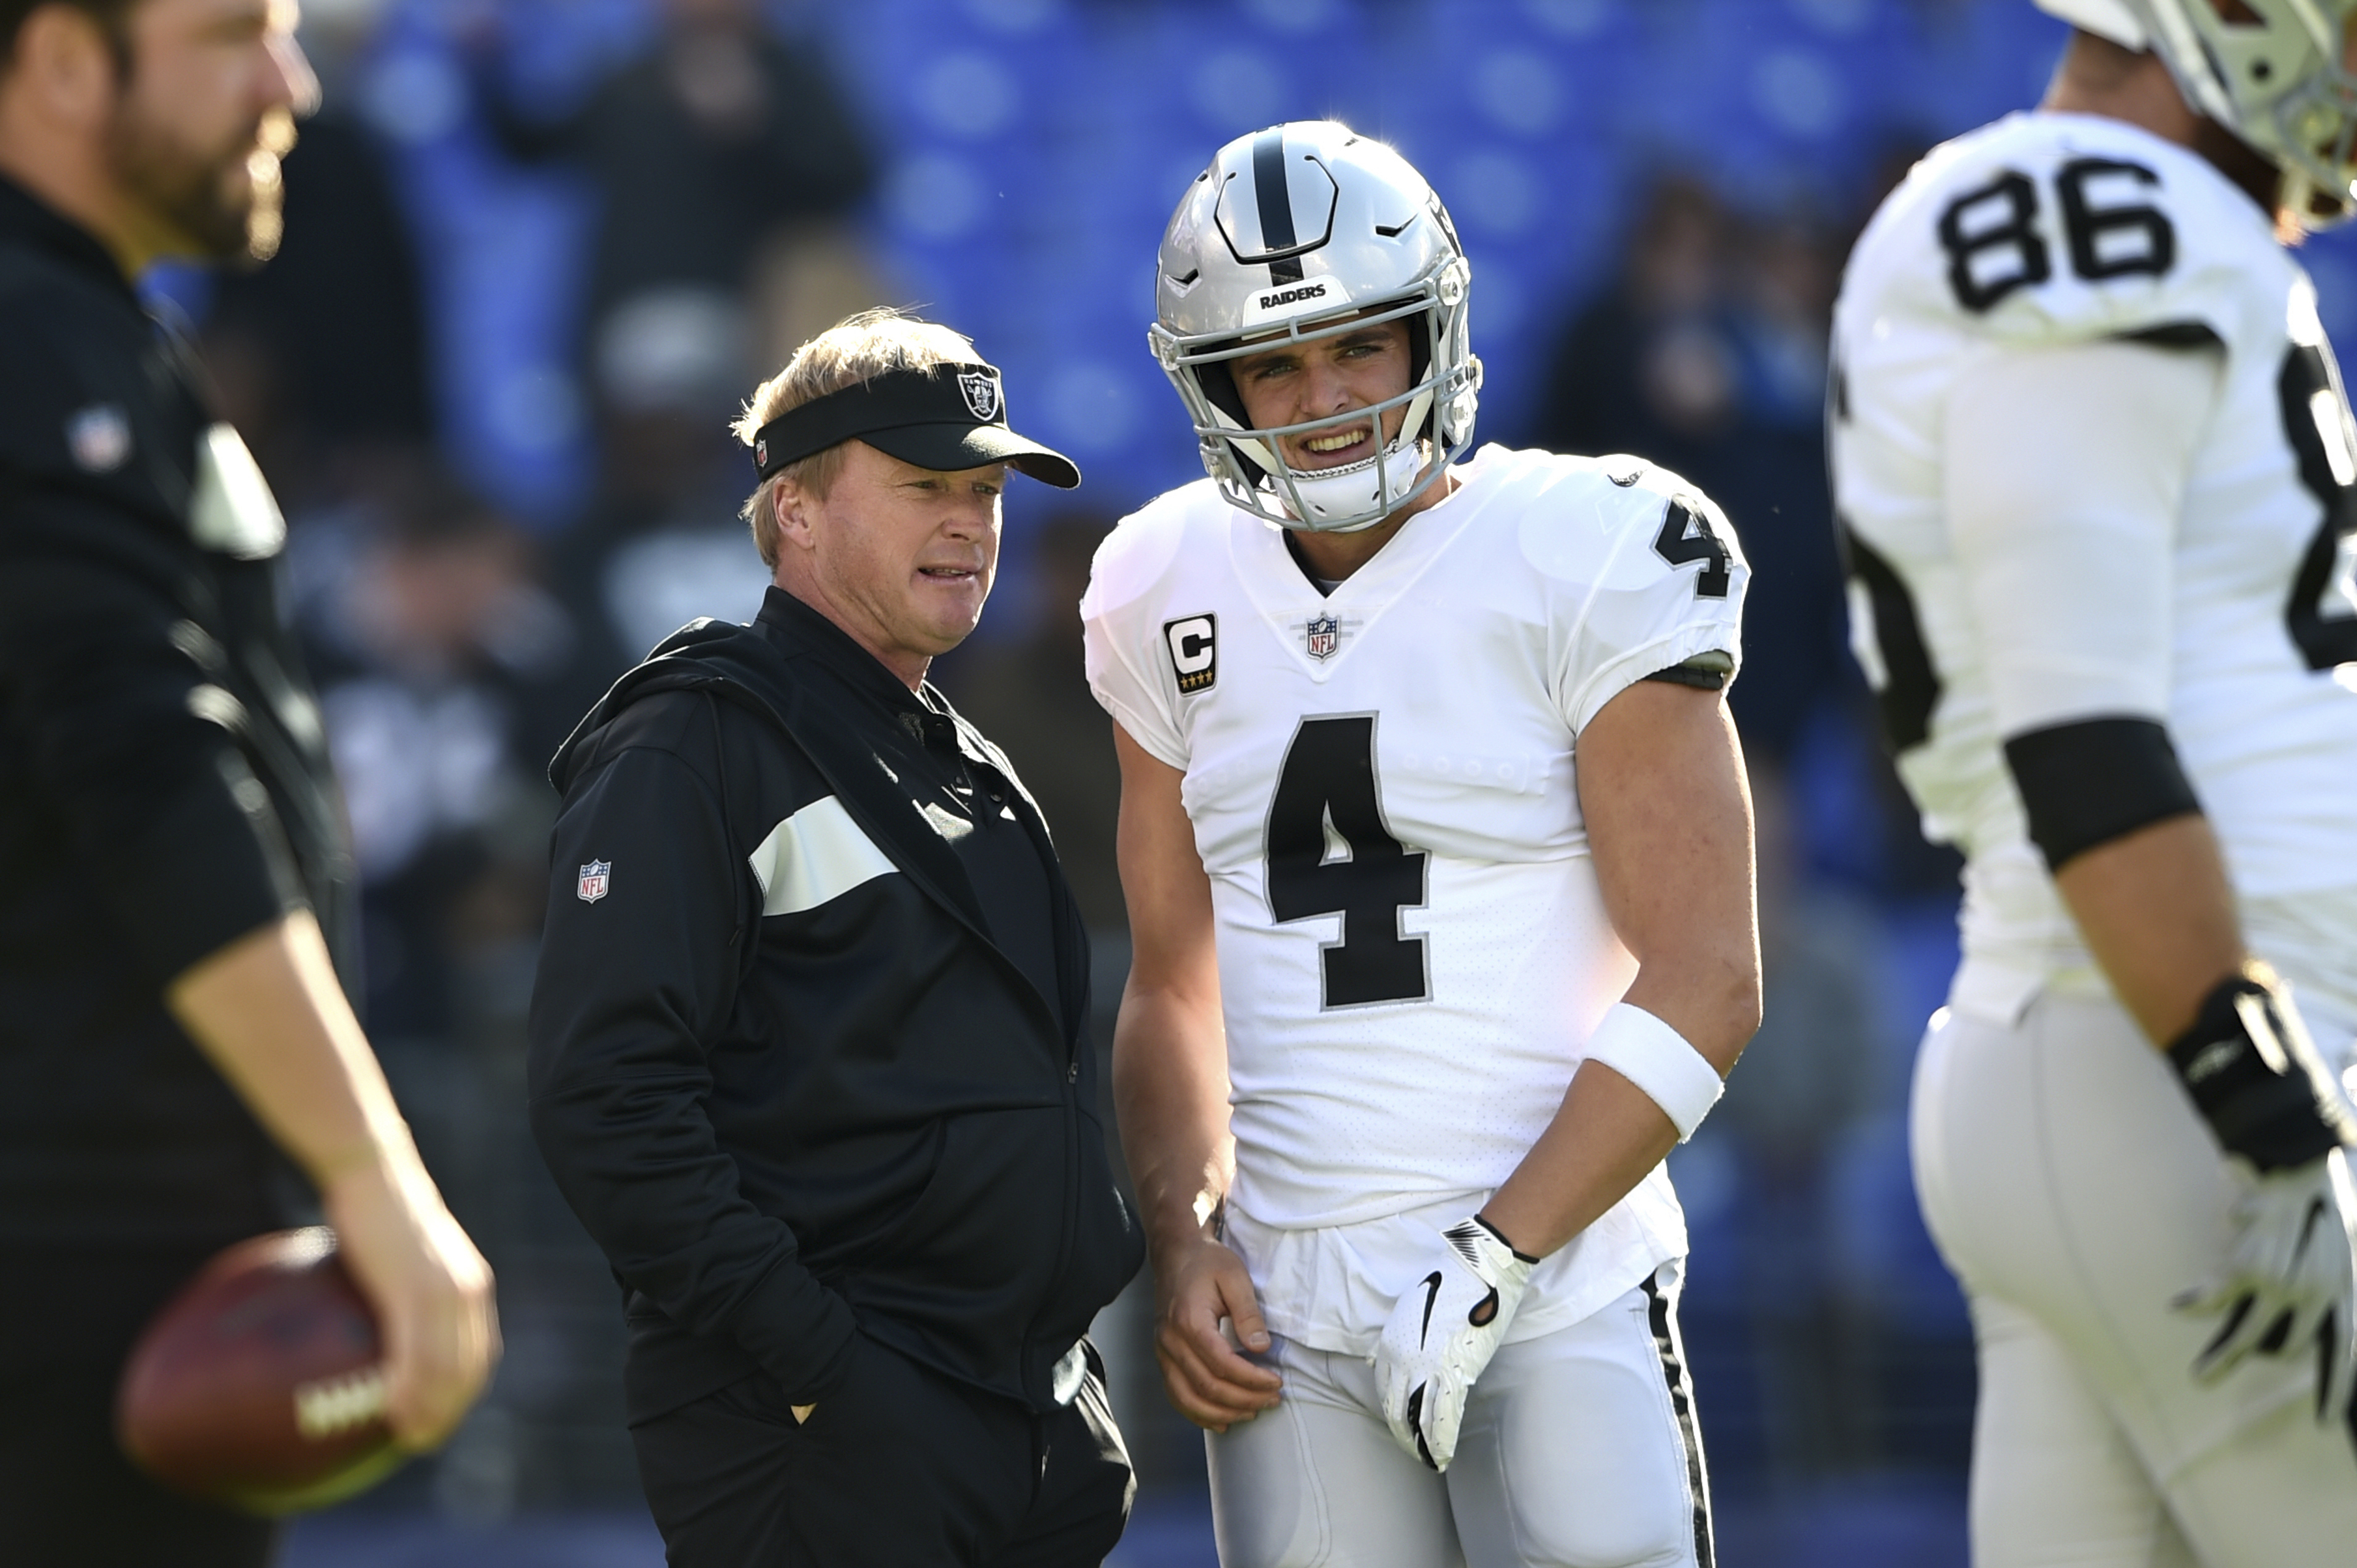 NFL 2019: Carr, Winston, Mariota among QBs in prove-it years